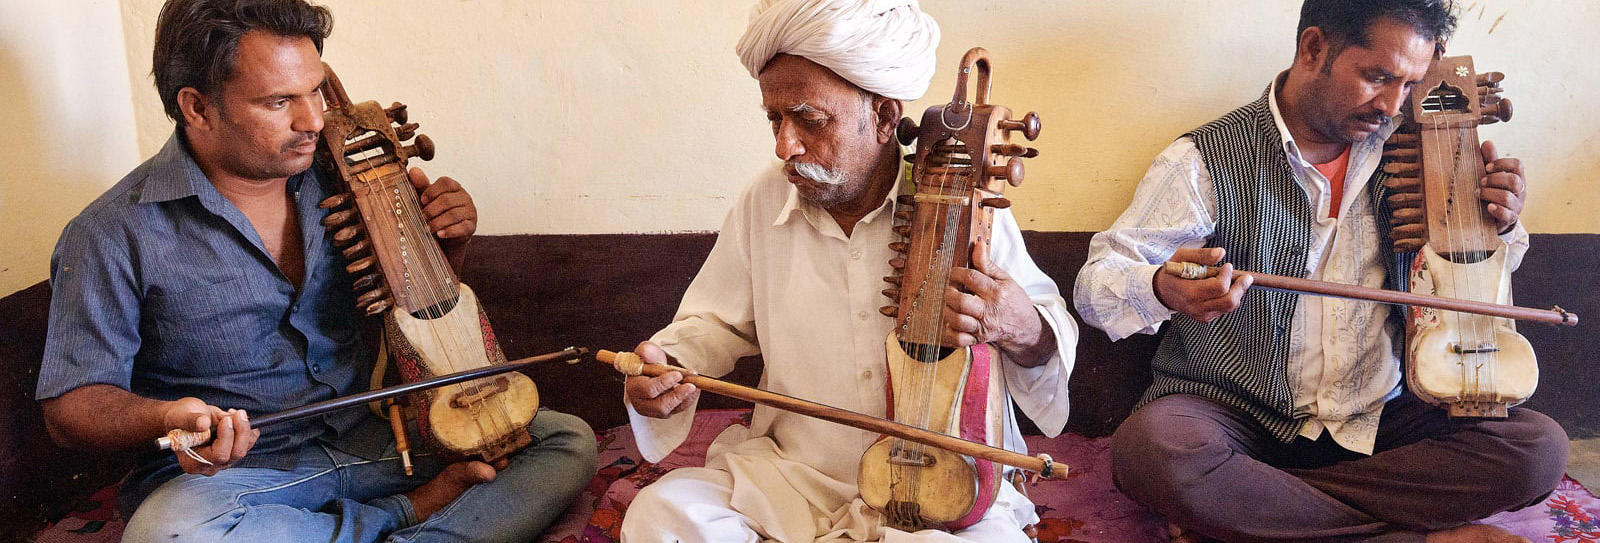 Rajasthan's Folk Musicians Find New Ways To Play